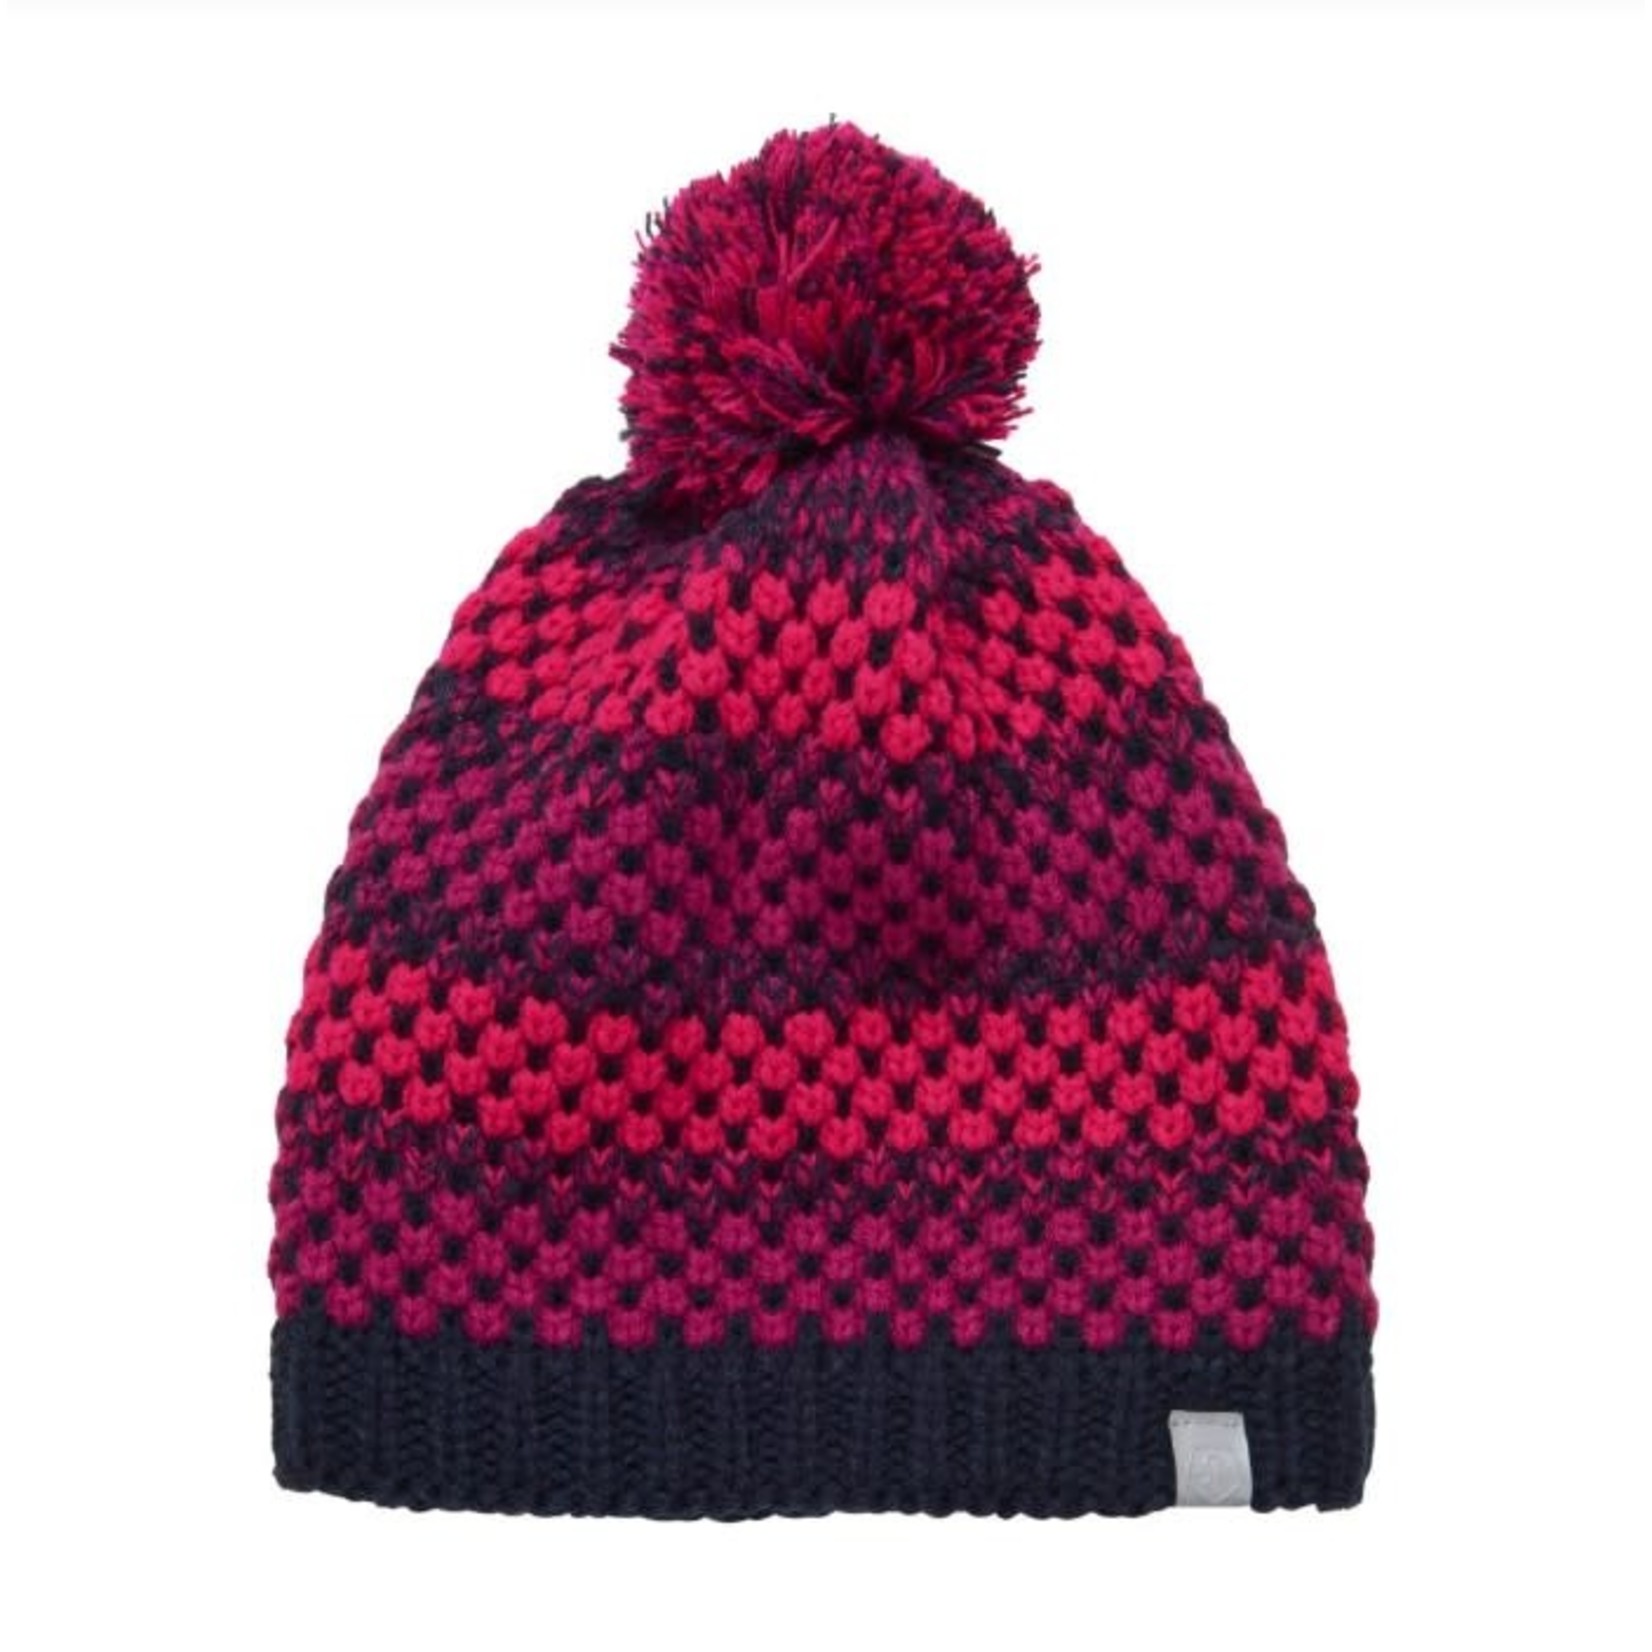 Color Kids COLOR KIDS - Knit winter hat with pompom - Fushia and navy